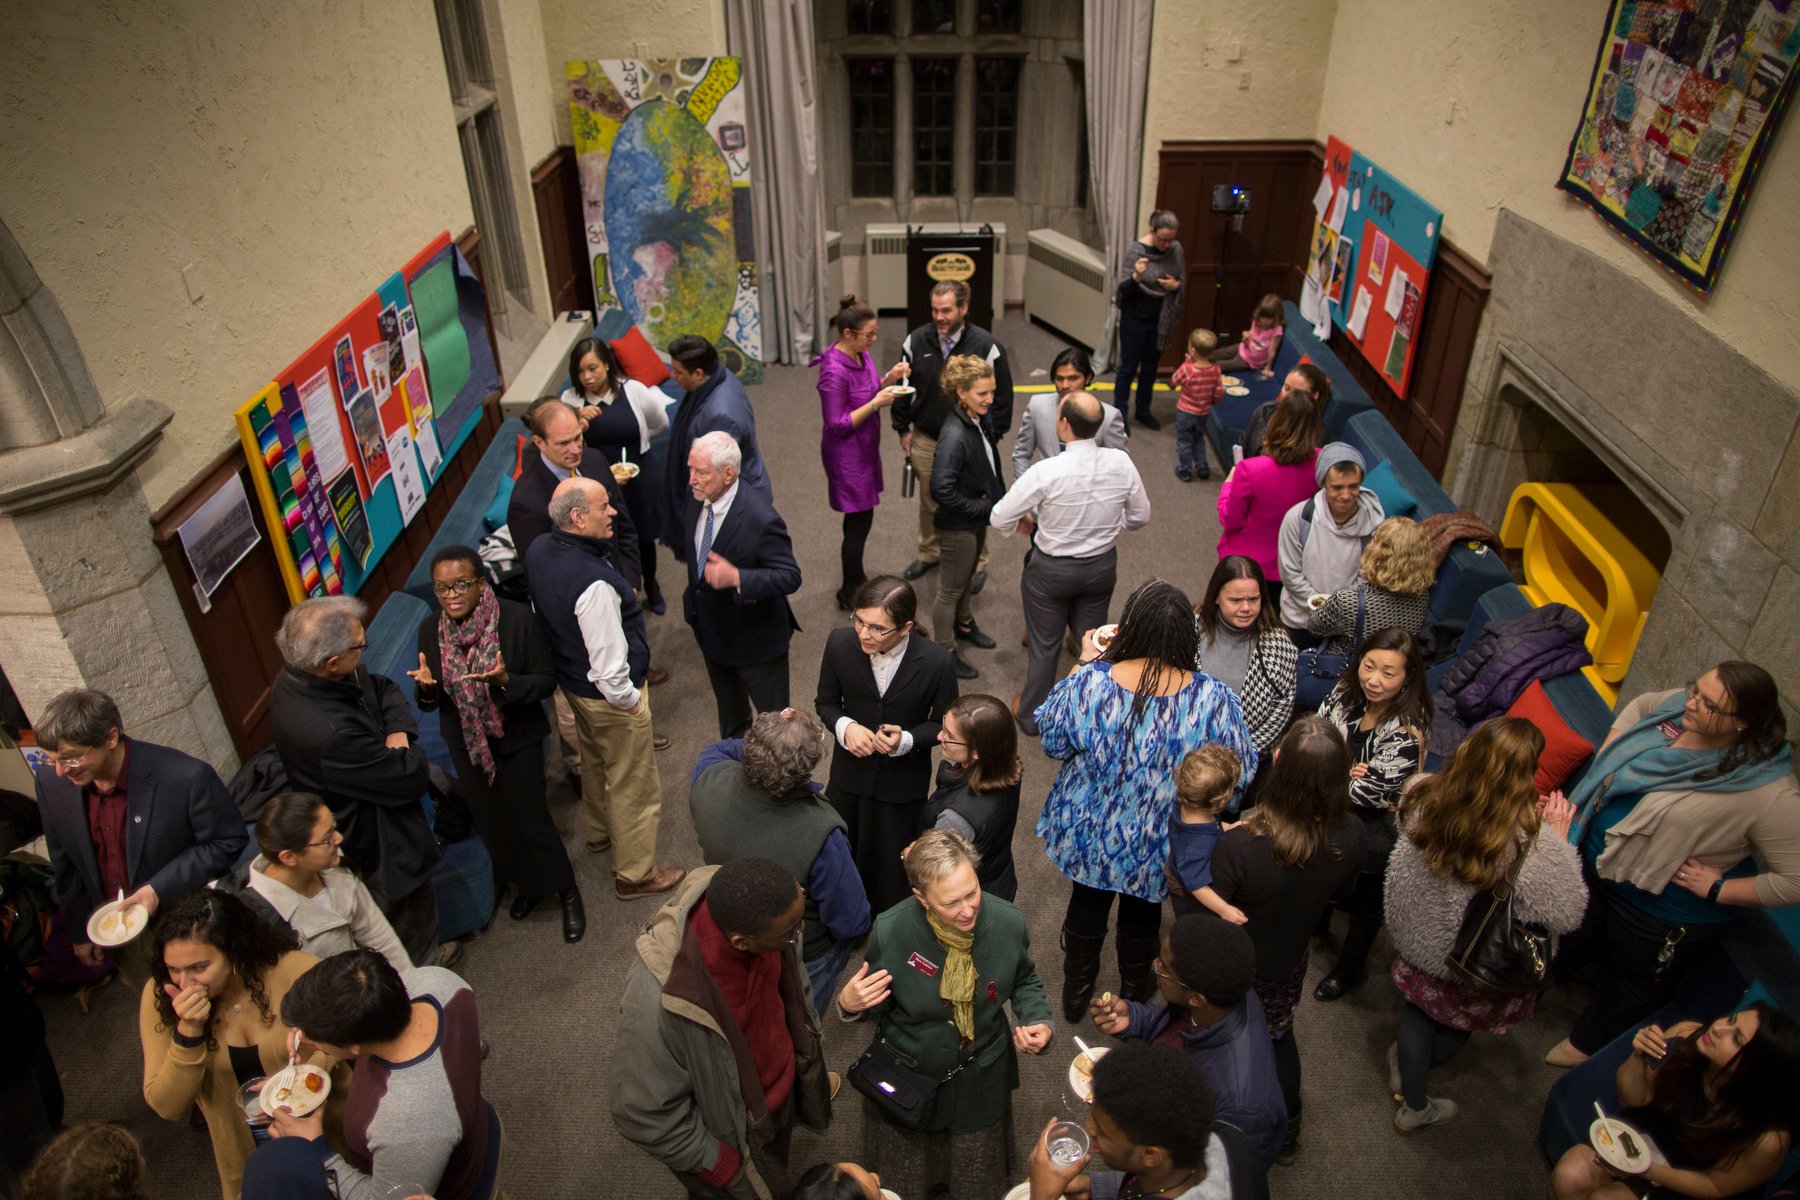 Swarthmore community members gather in the Clothier Intercultural Center Big Room.